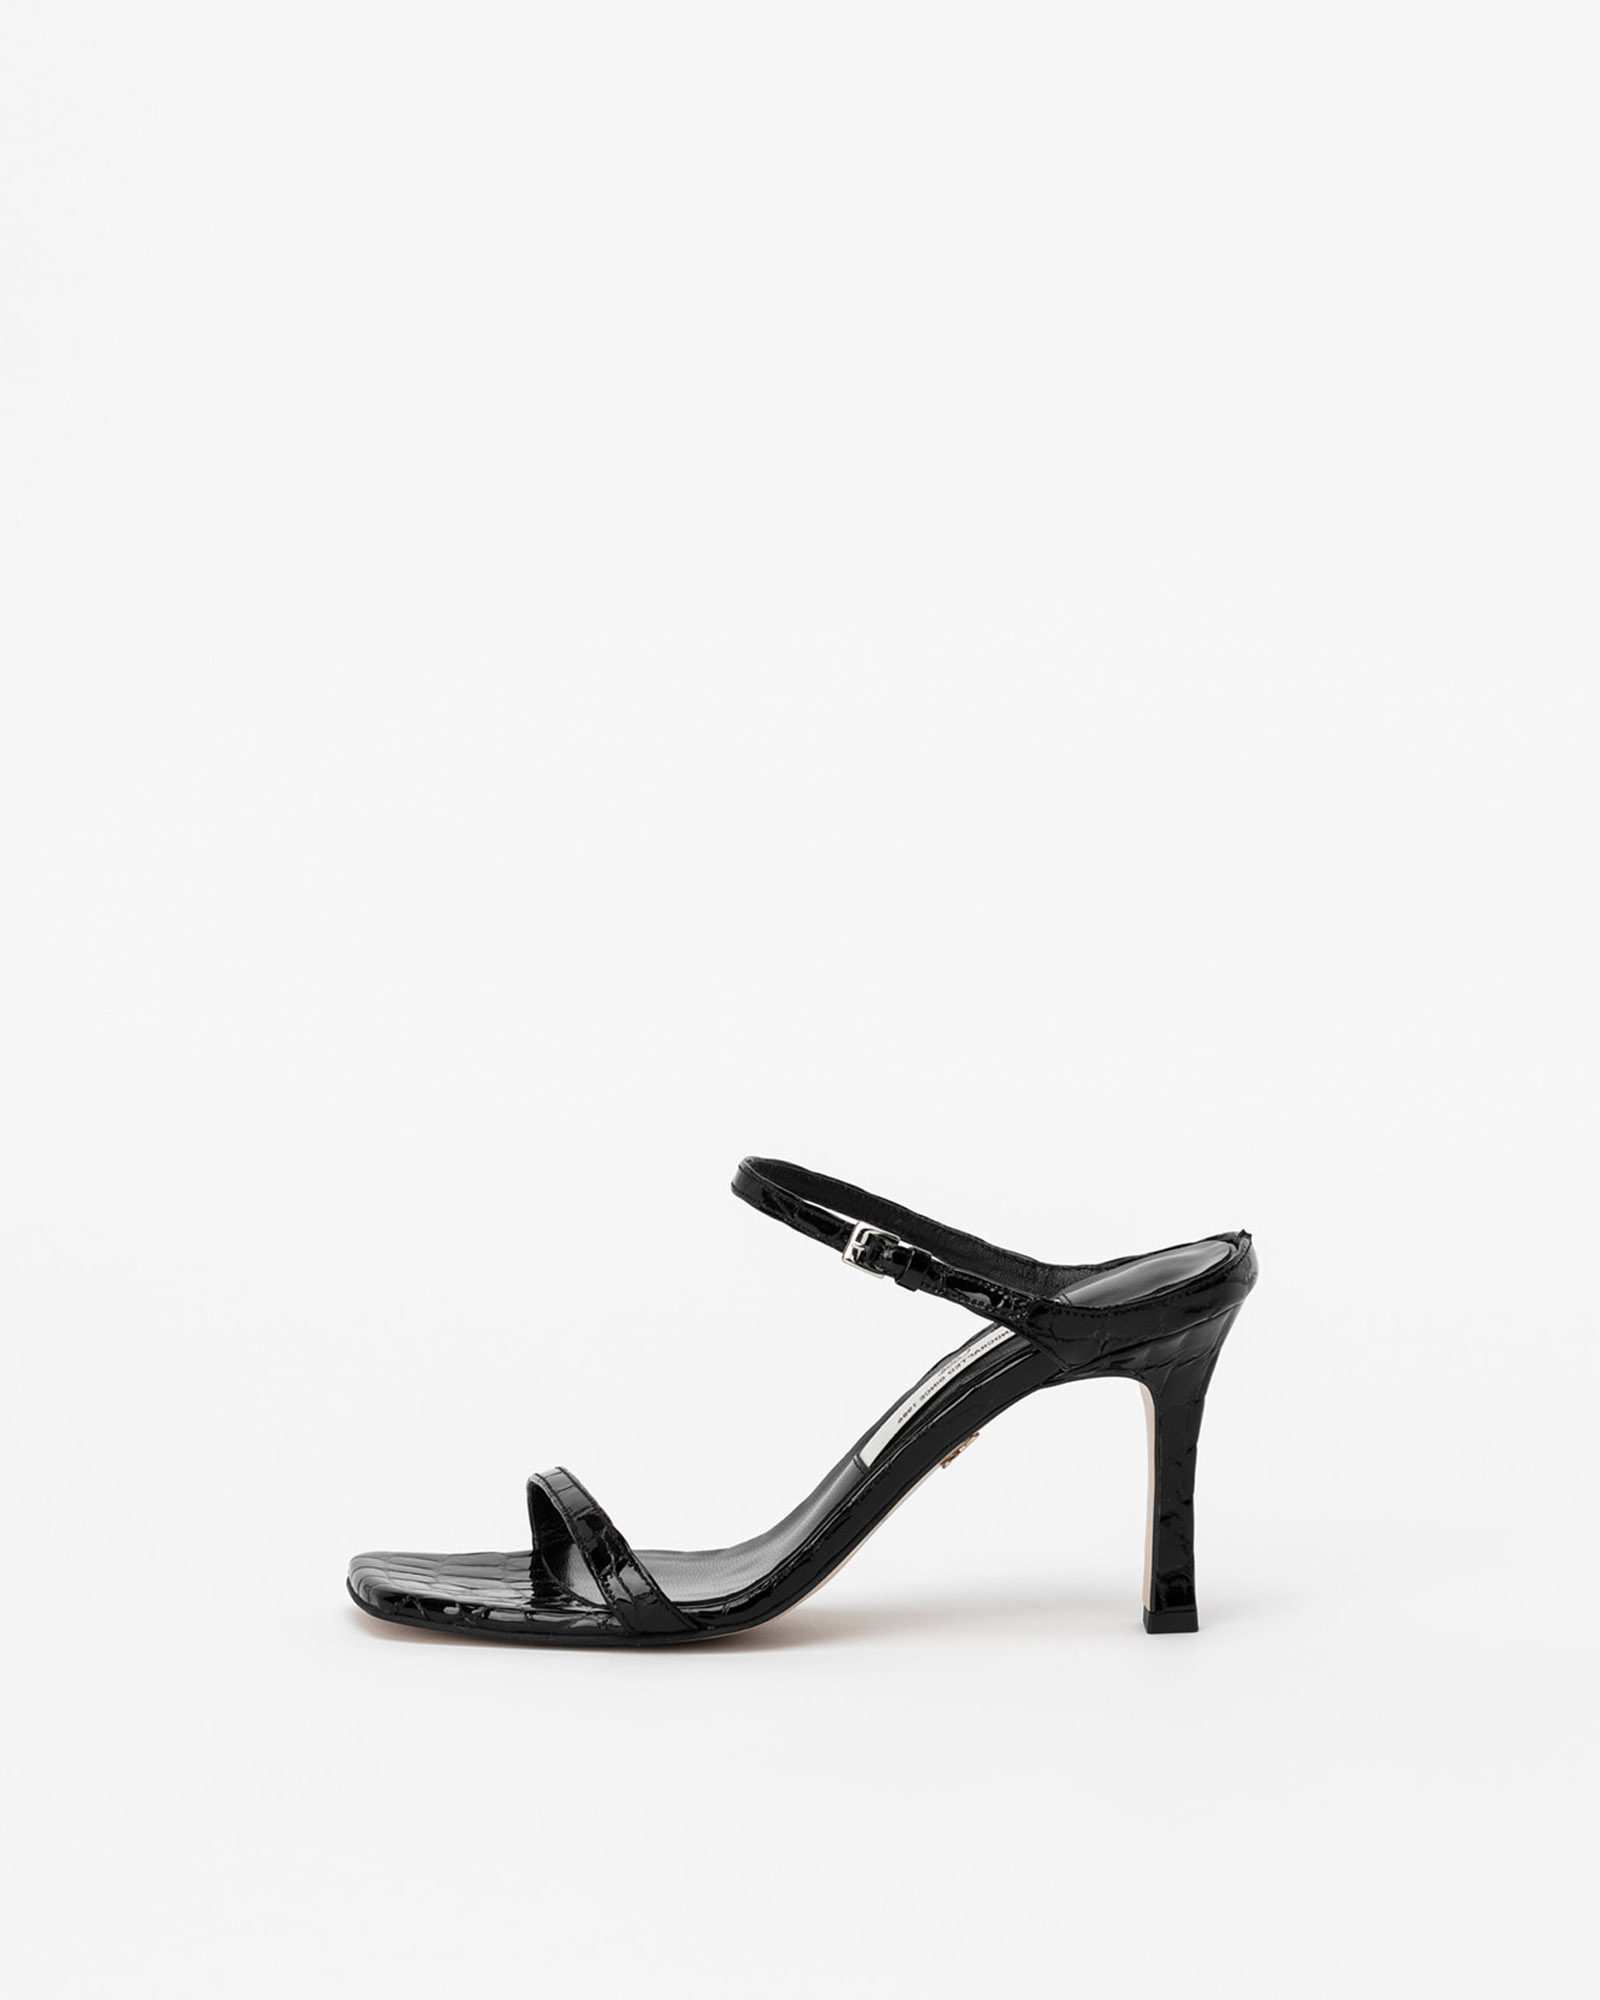 Sequire Buckled Strap Mule Sandals in Black Crocodile Prints